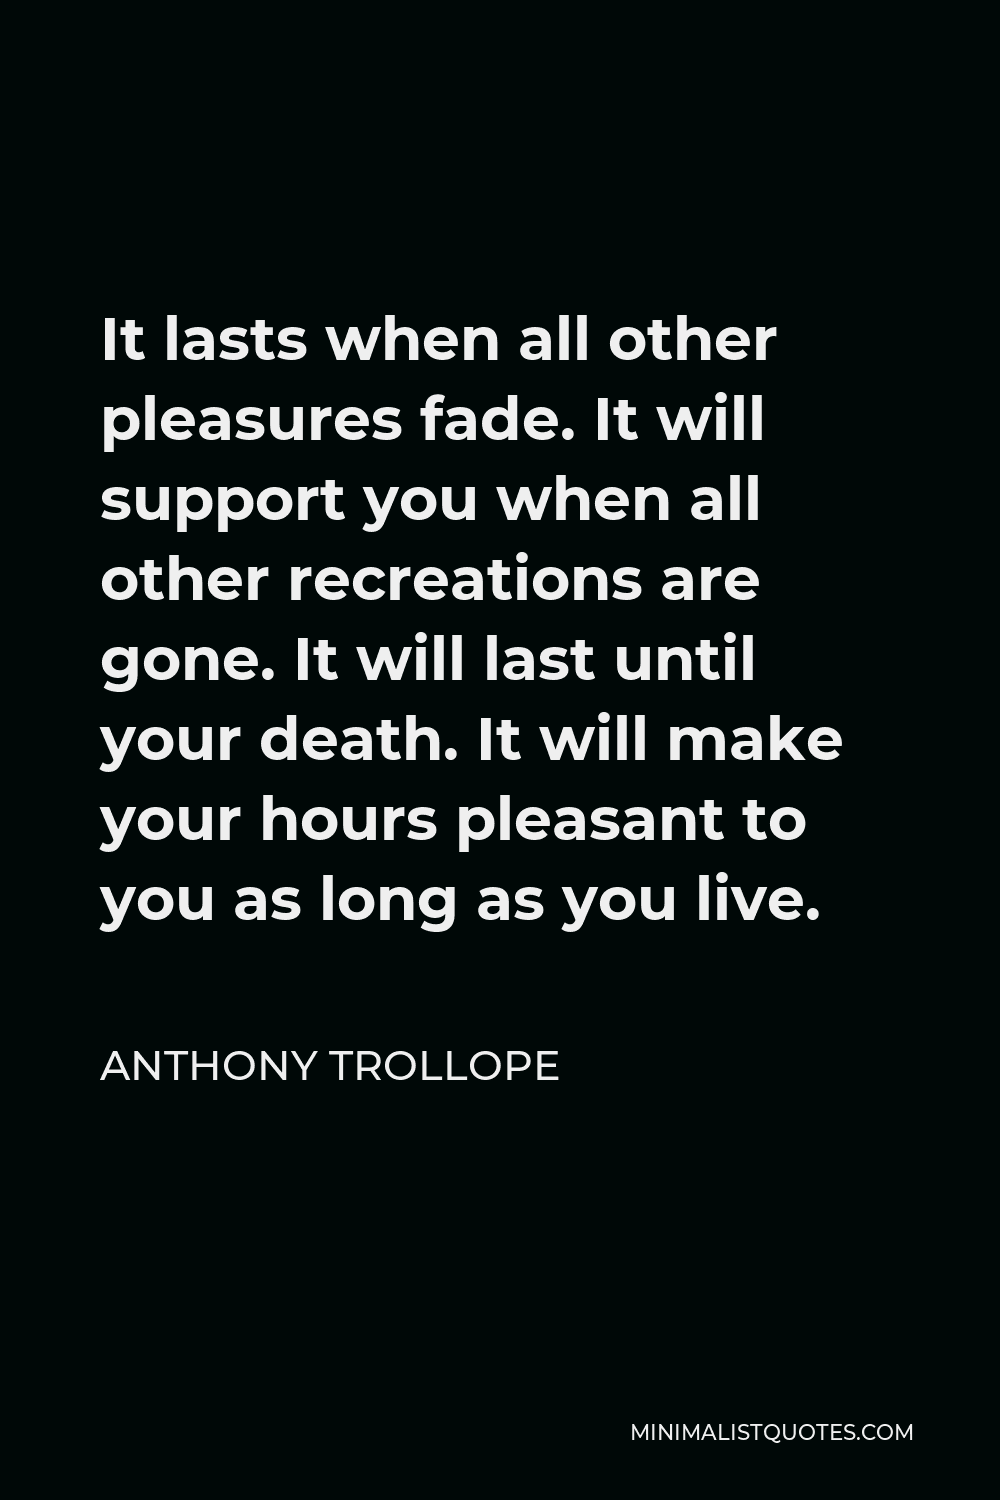 Anthony Trollope Quote - It lasts when all other pleasures fade. It will support you when all other recreations are gone. It will last until your death. It will make your hours pleasant to you as long as you live.